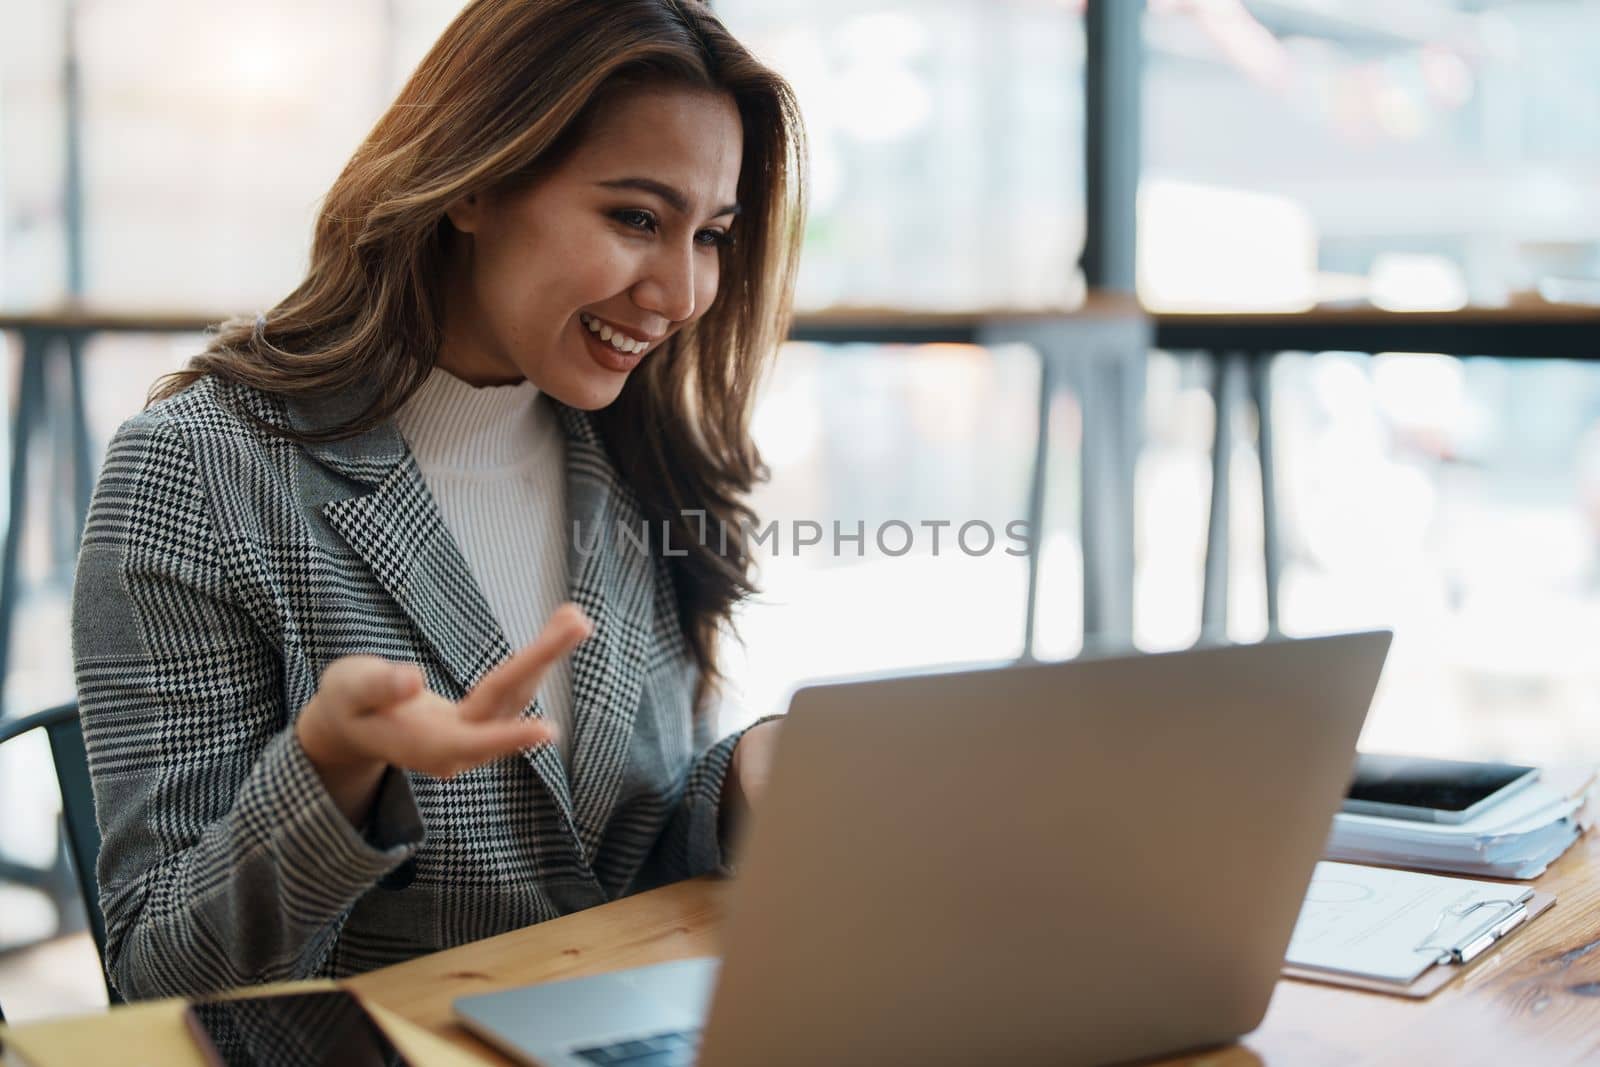 Business work and planning, portrait of a businesswoman using a computer in a meeting by Manastrong